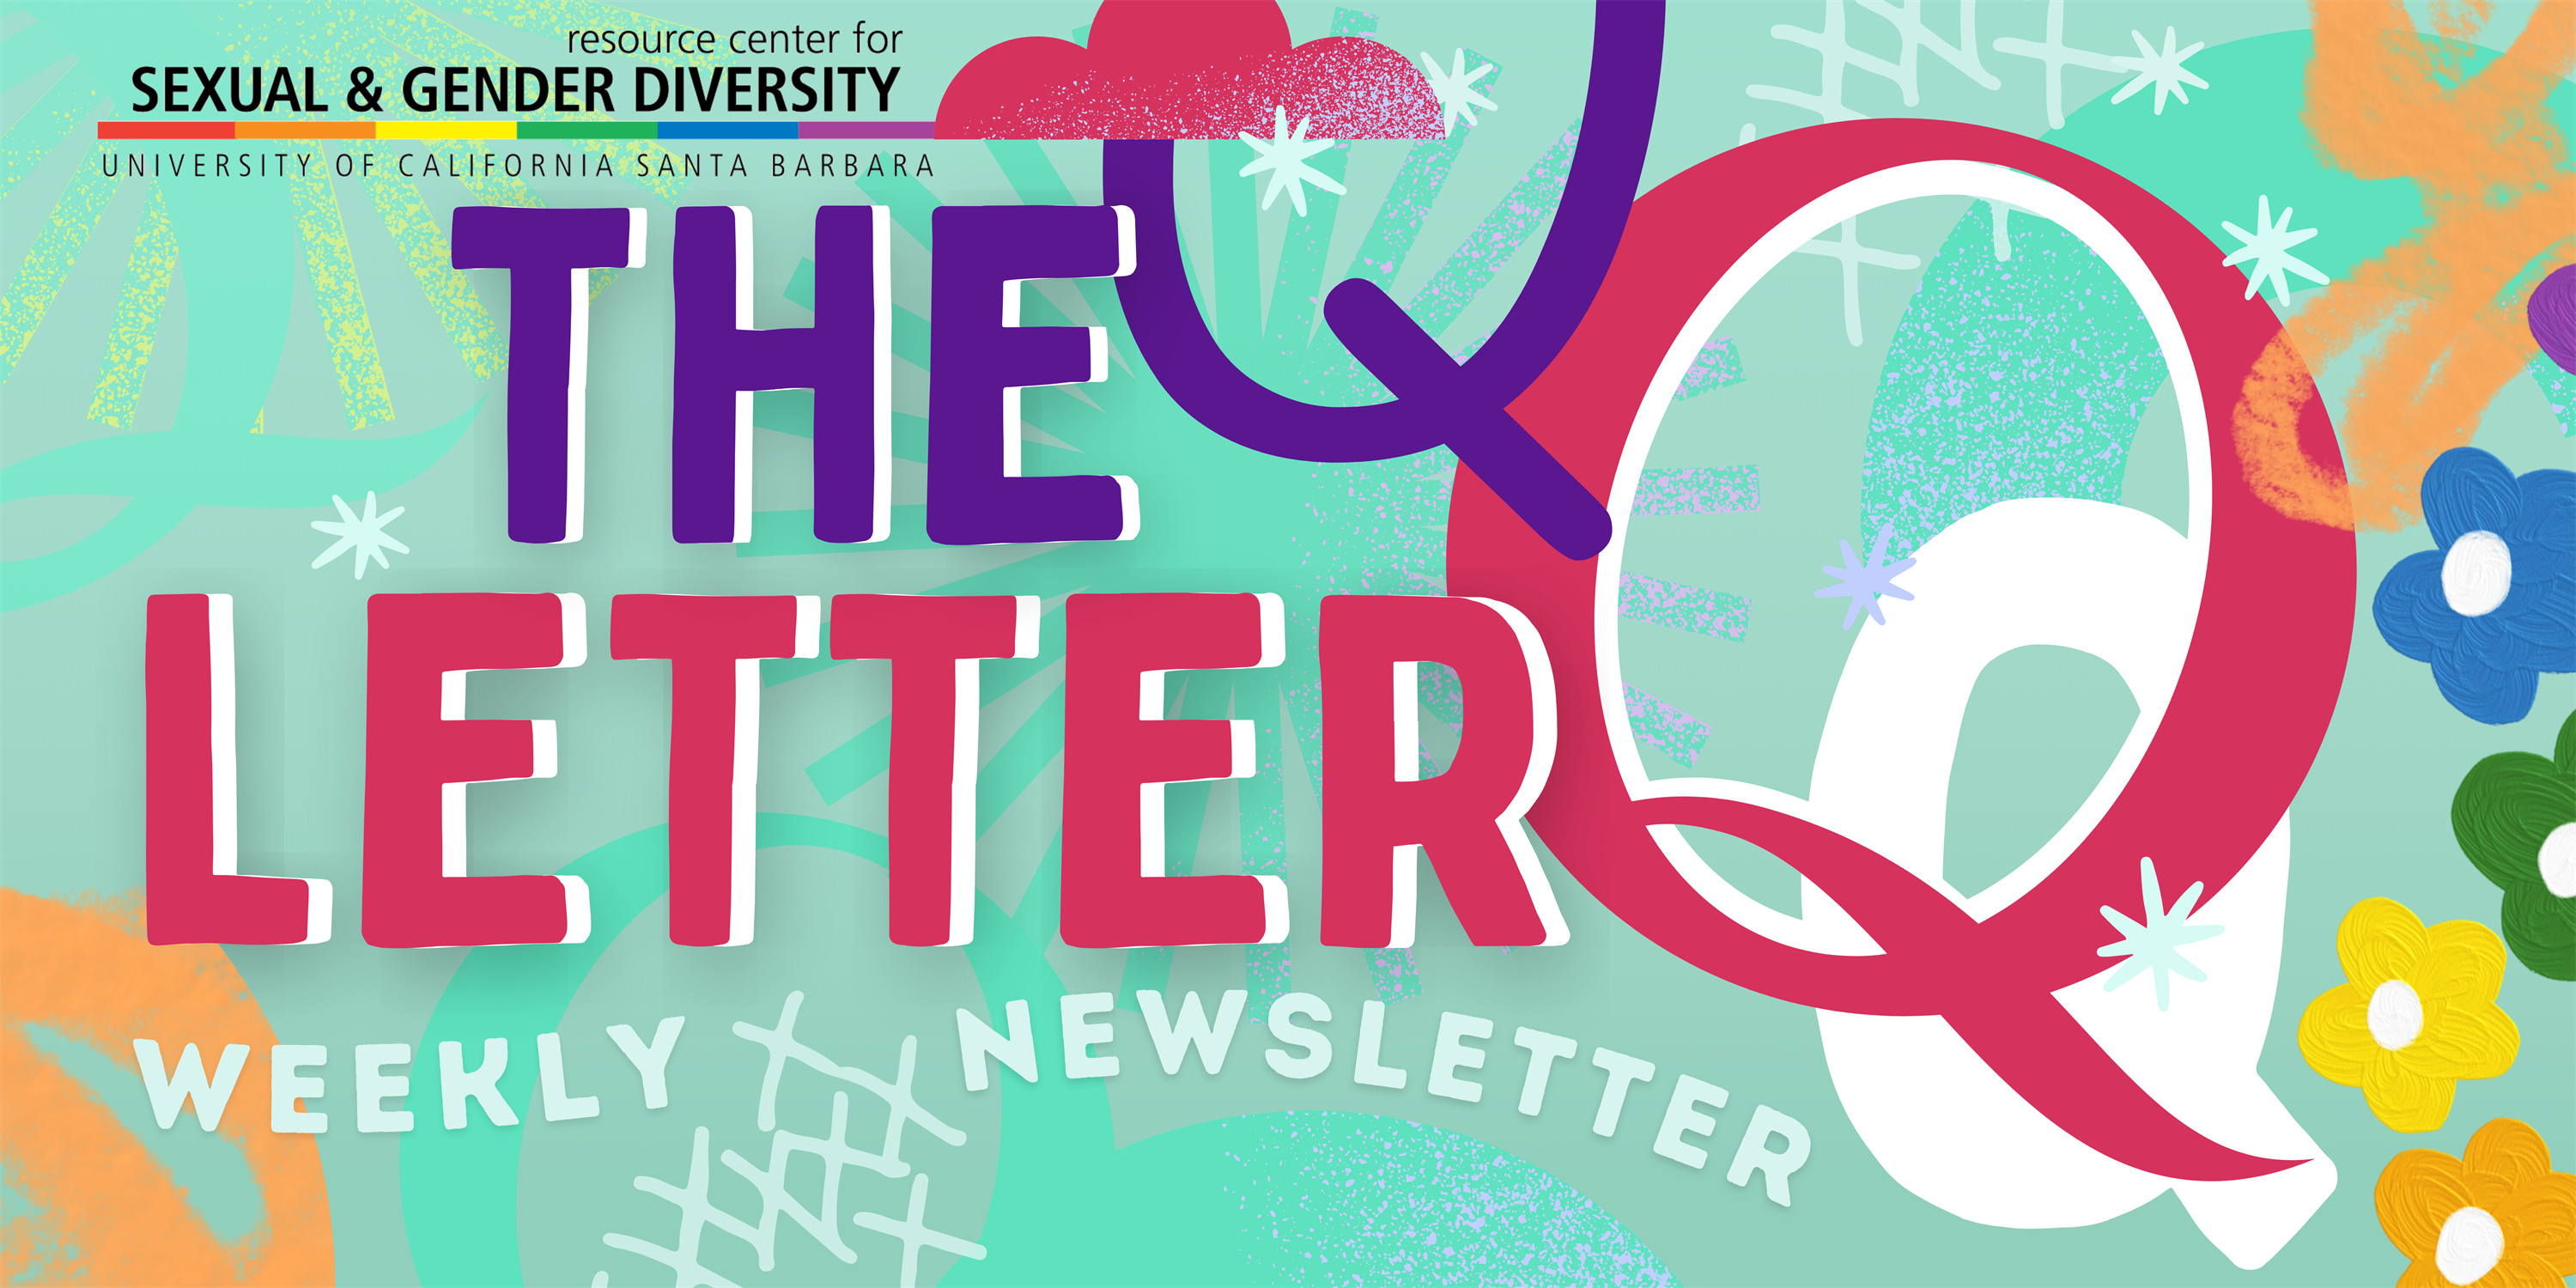 Resource Center for Sexual and Gender Diversity Newsletter: The Letter Q